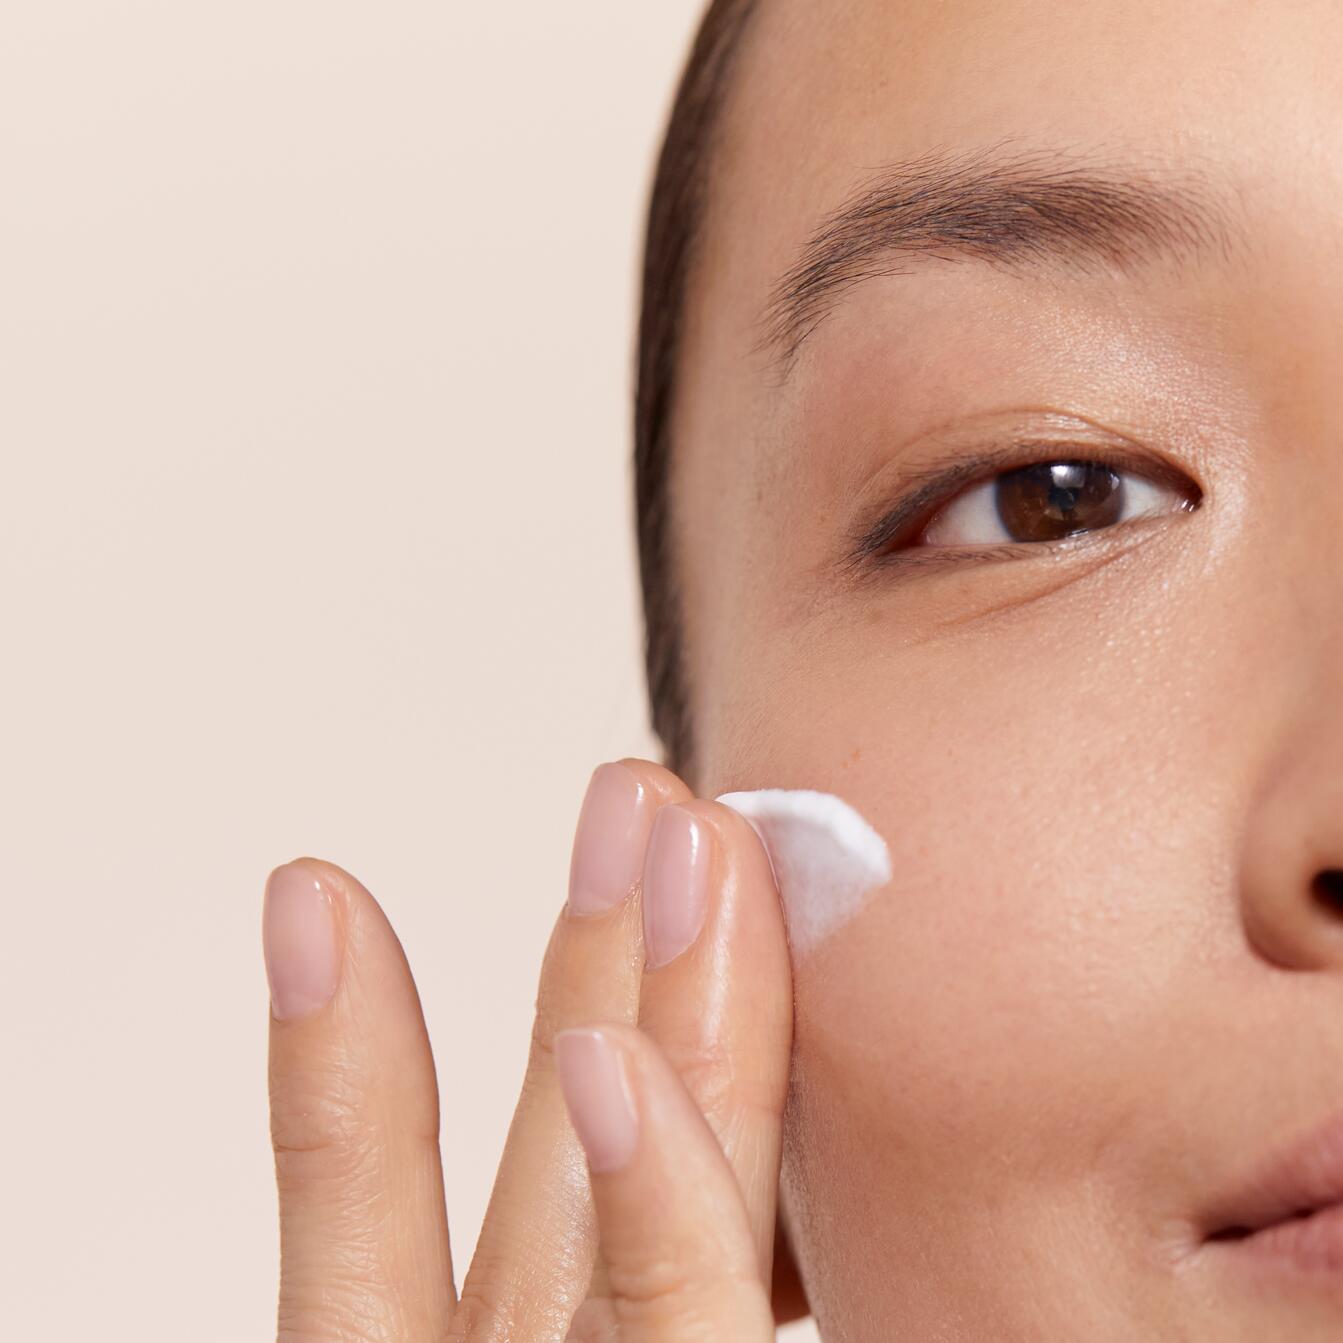 Best practices for moisturising your face properly